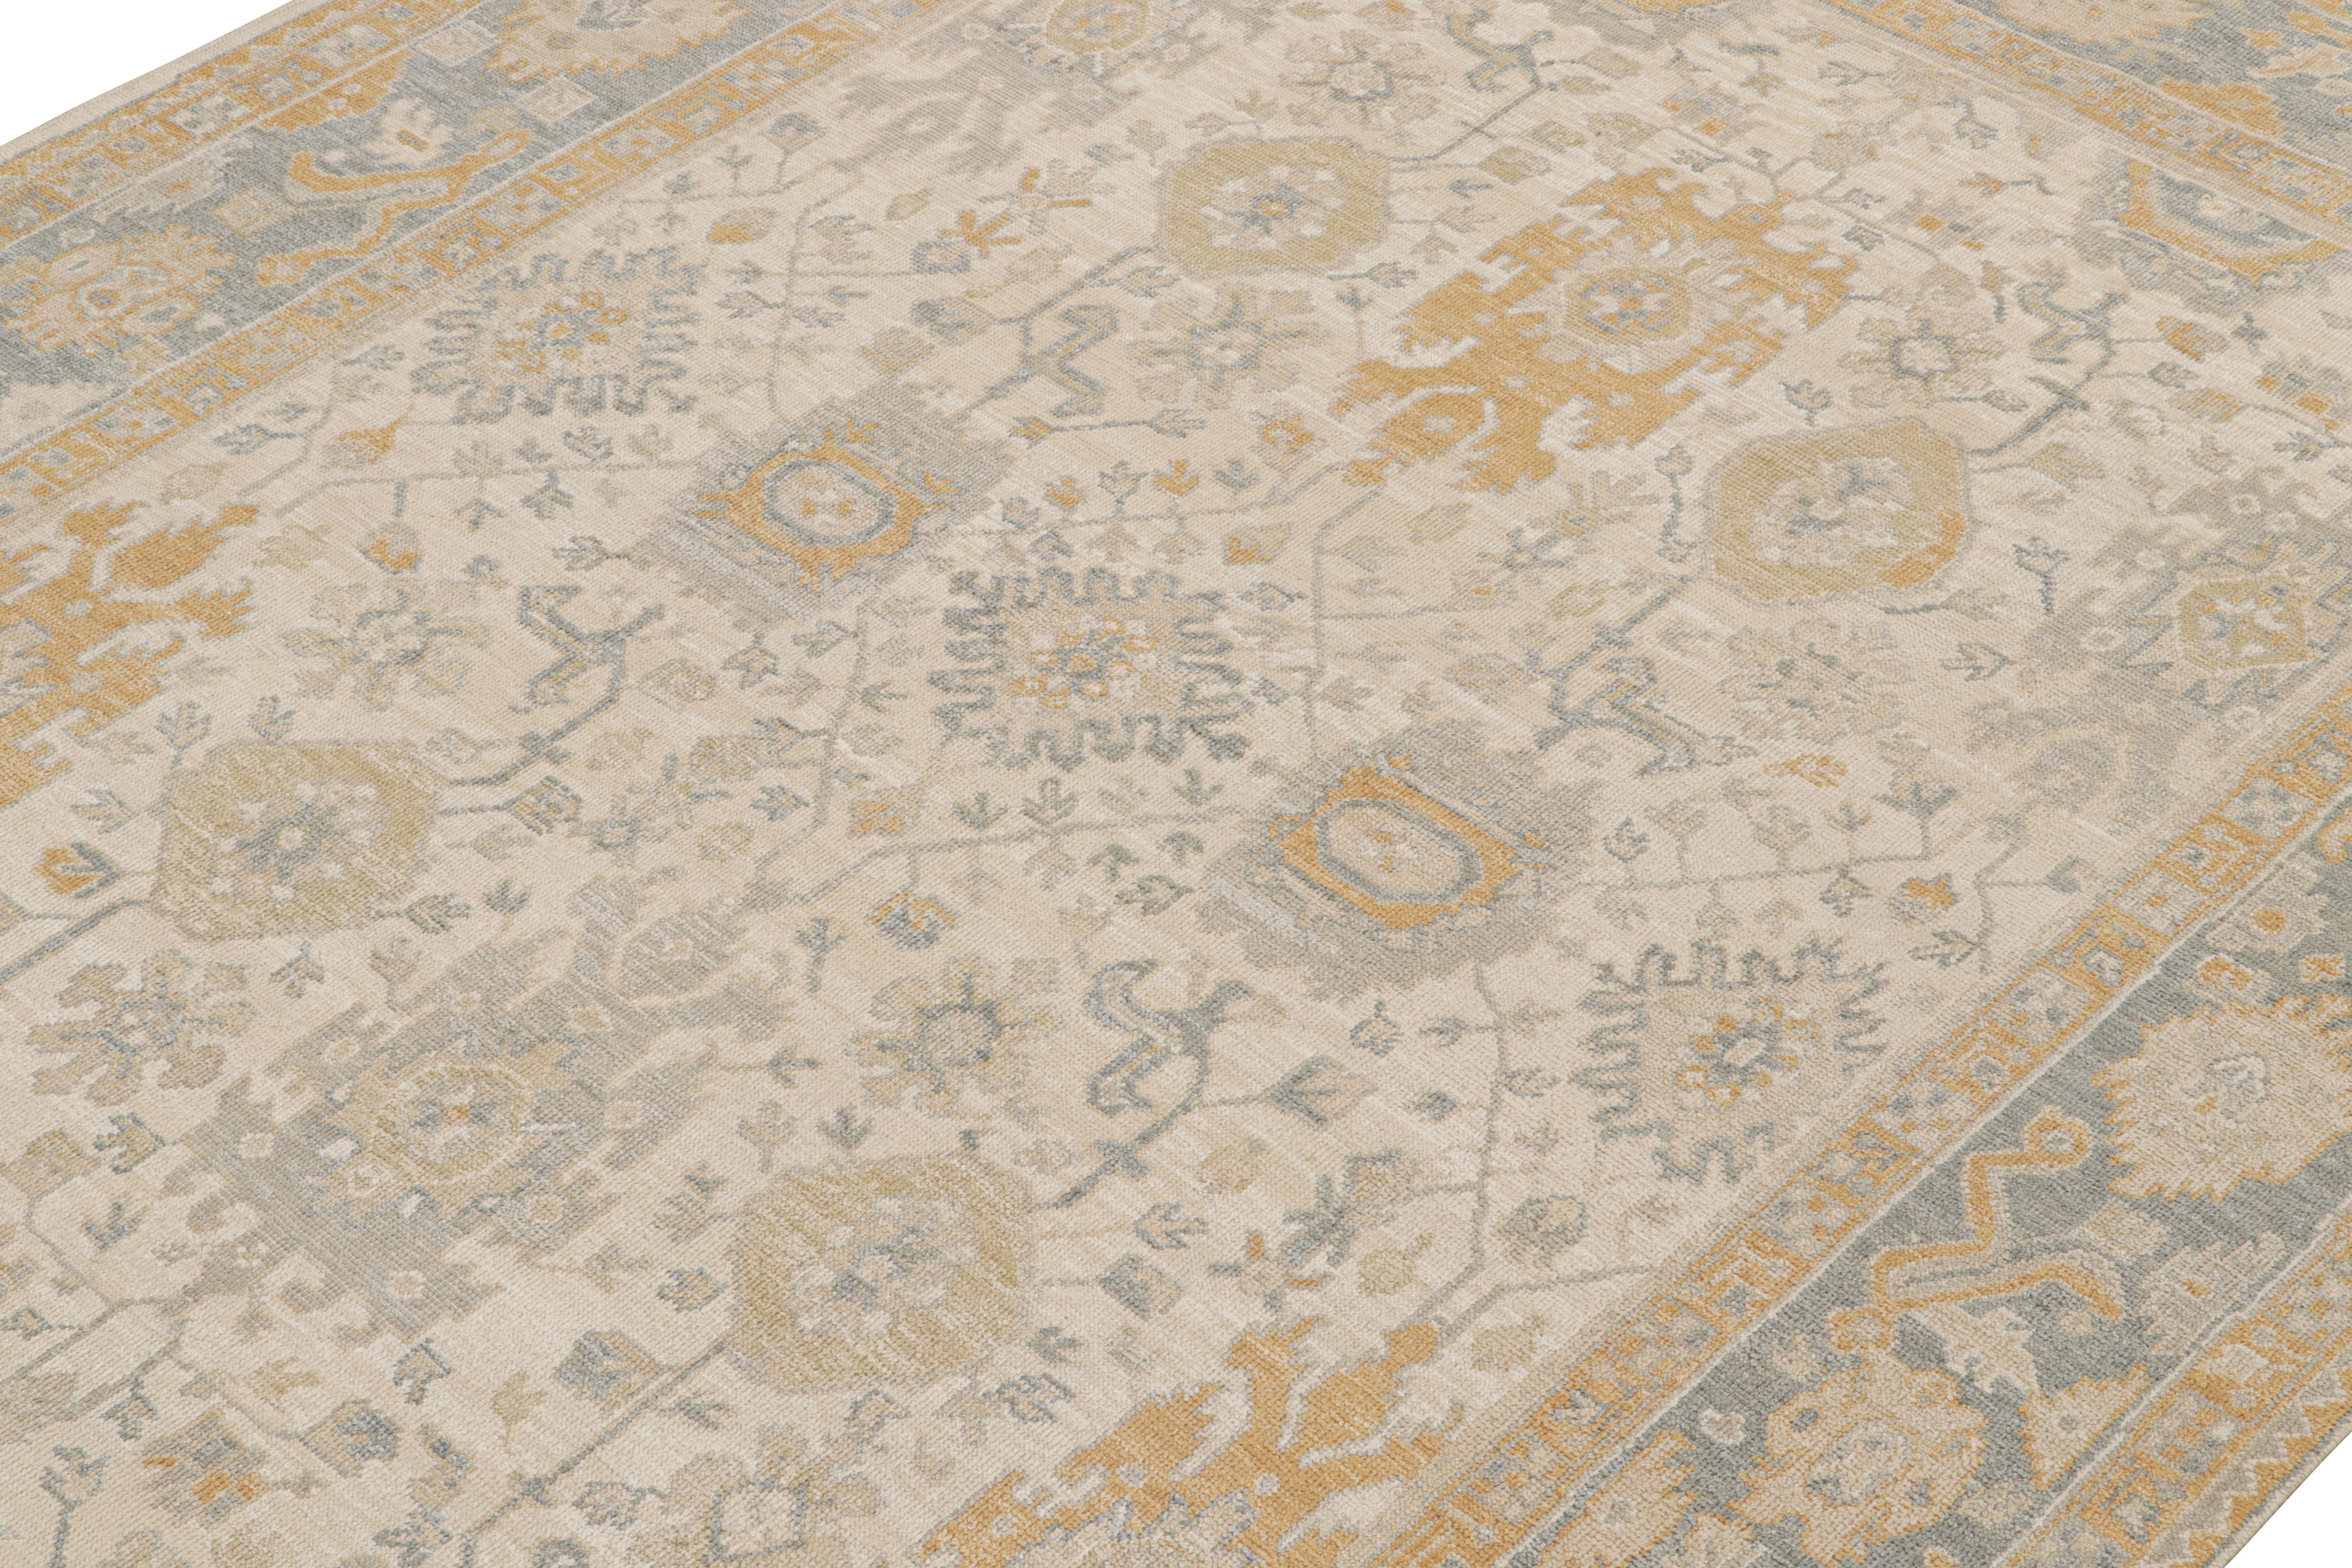 Hand-Knotted Rug & Kilim’s Oushak Style Rug in Beige, Gold and Blue Floral Patterns For Sale